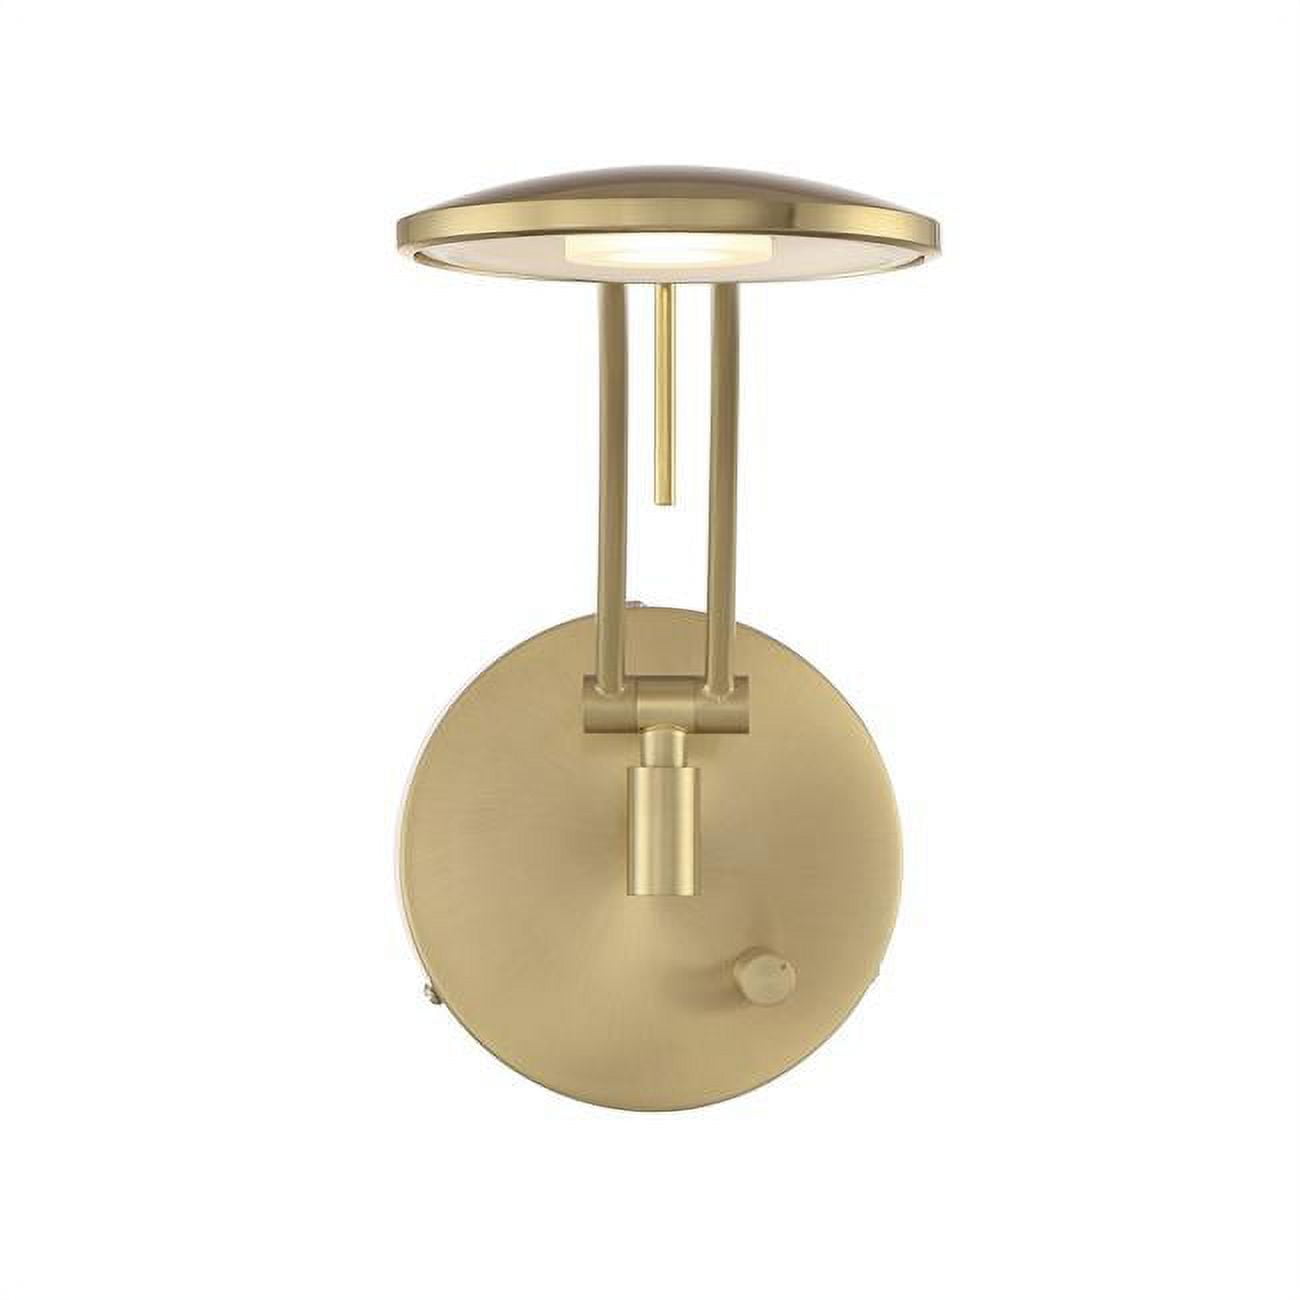 Picture of Arnsberg 225810108 Dessau Arch Wall Sconce, Satin Brass